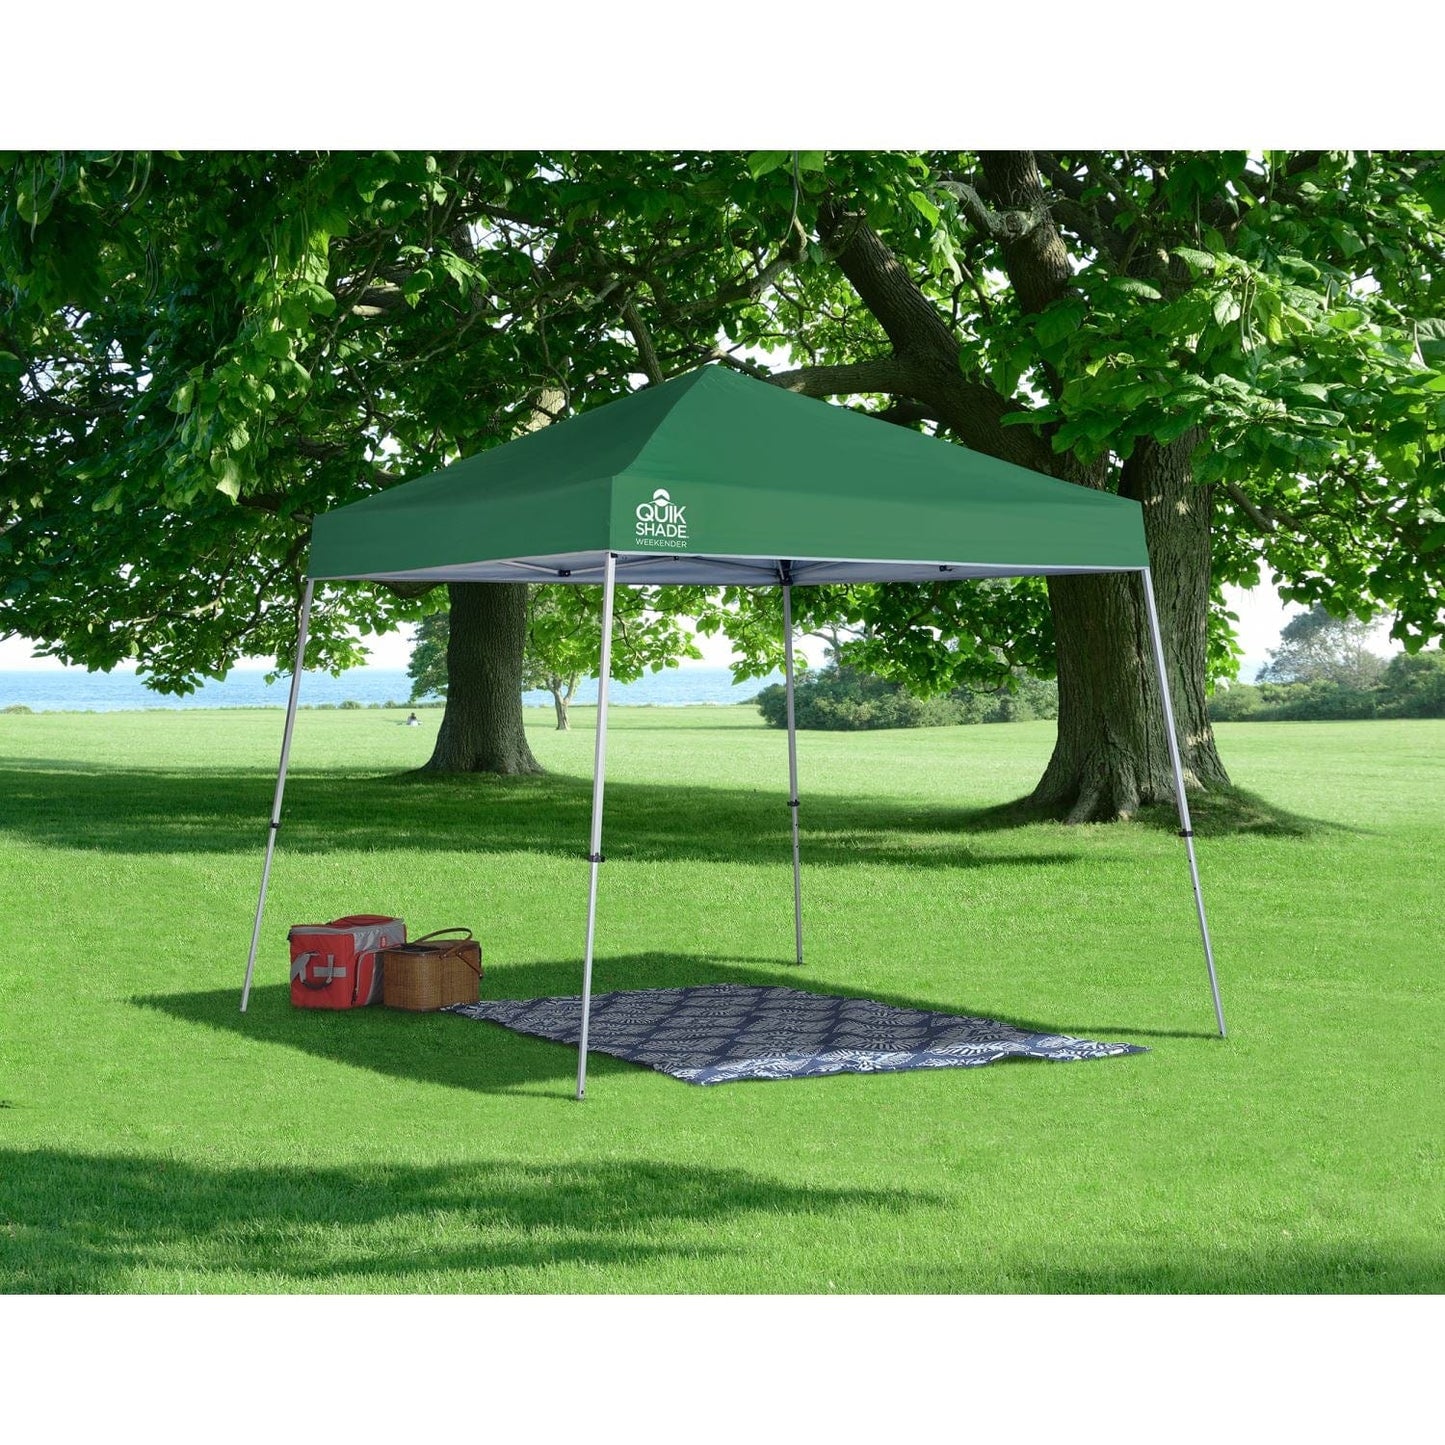 The Fulfiller Pop Up Canopies Quik Shade | Weekender Elite Weekender Elite WE64 10' x 10' Slant Leg Canopy - Green 157374DS